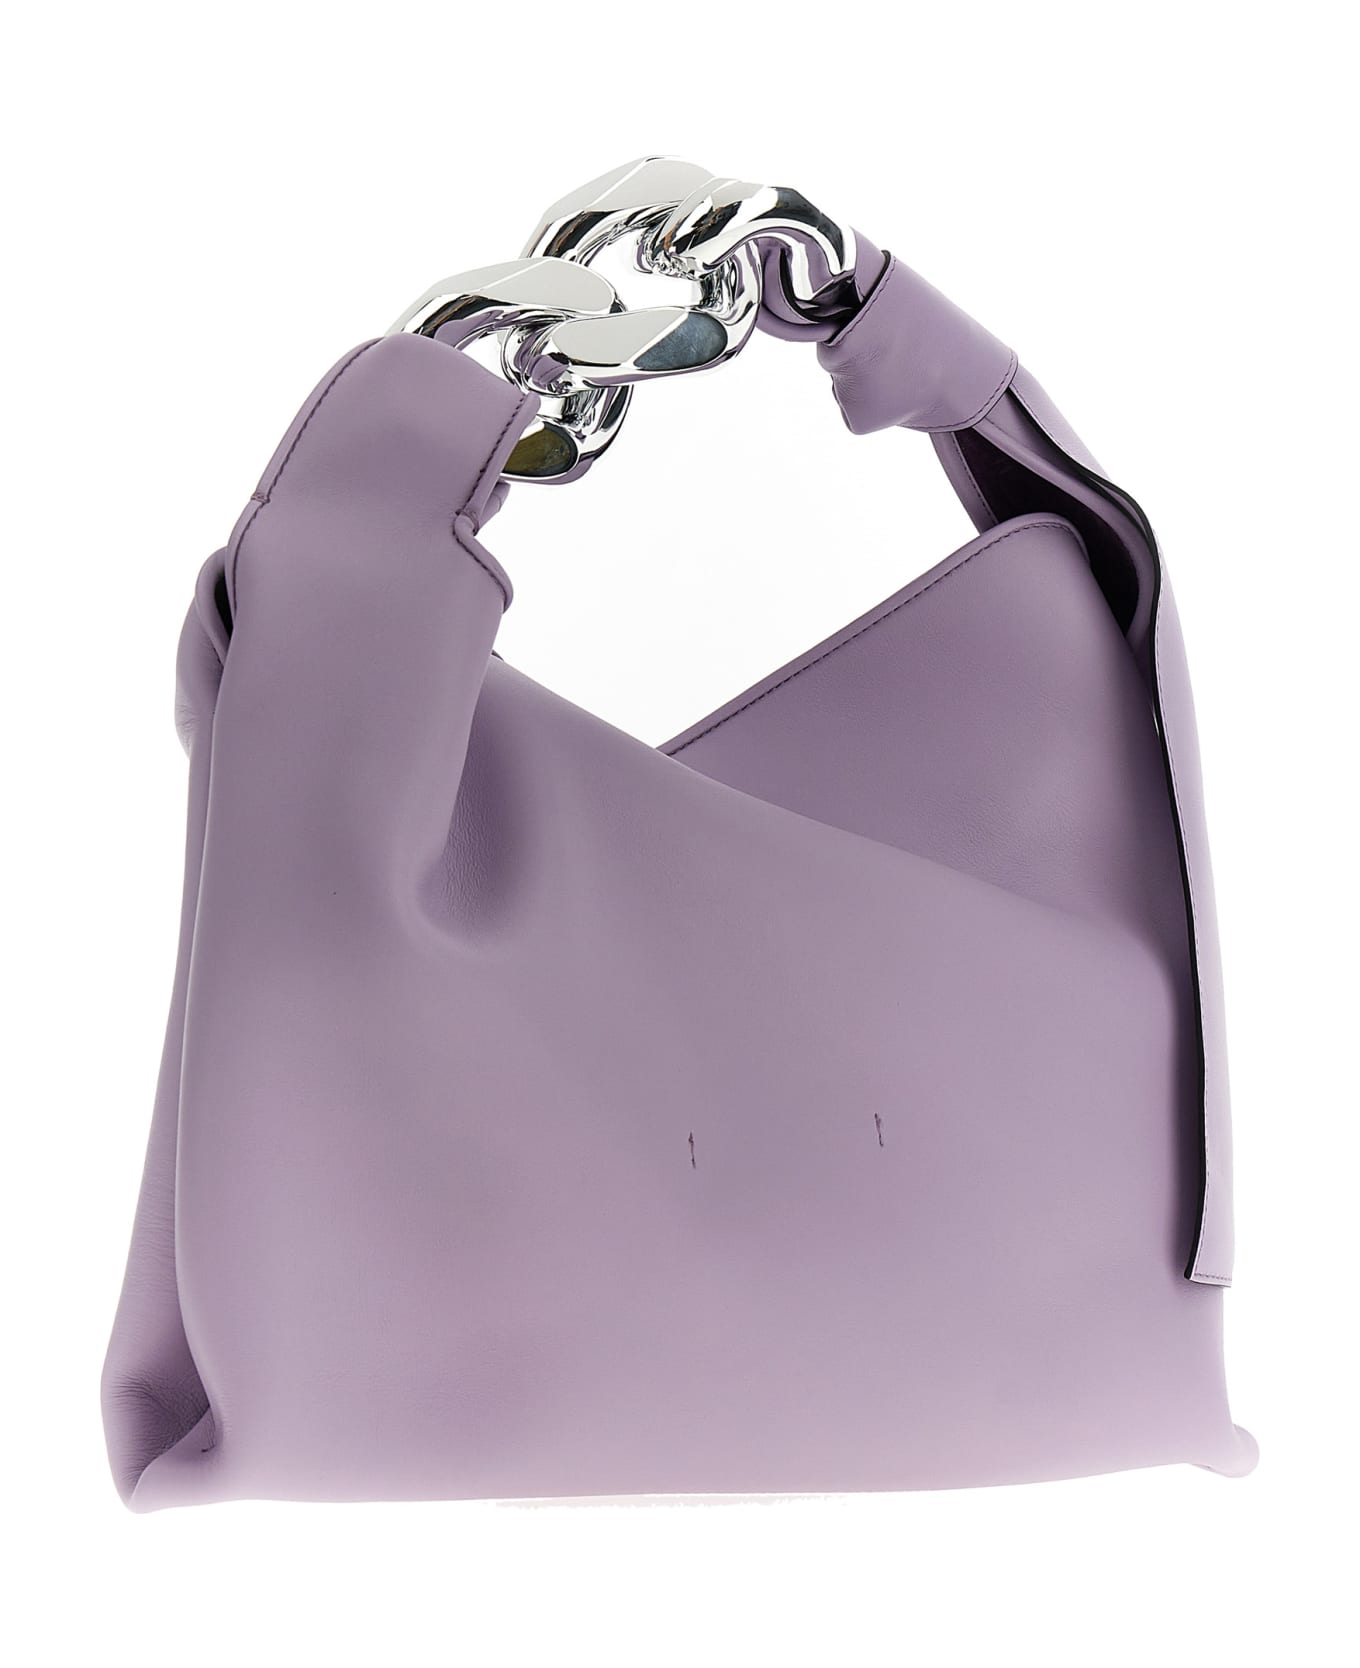 J.W. Anderson 'chain Hobo' Small Shoulder Bag - Lilac